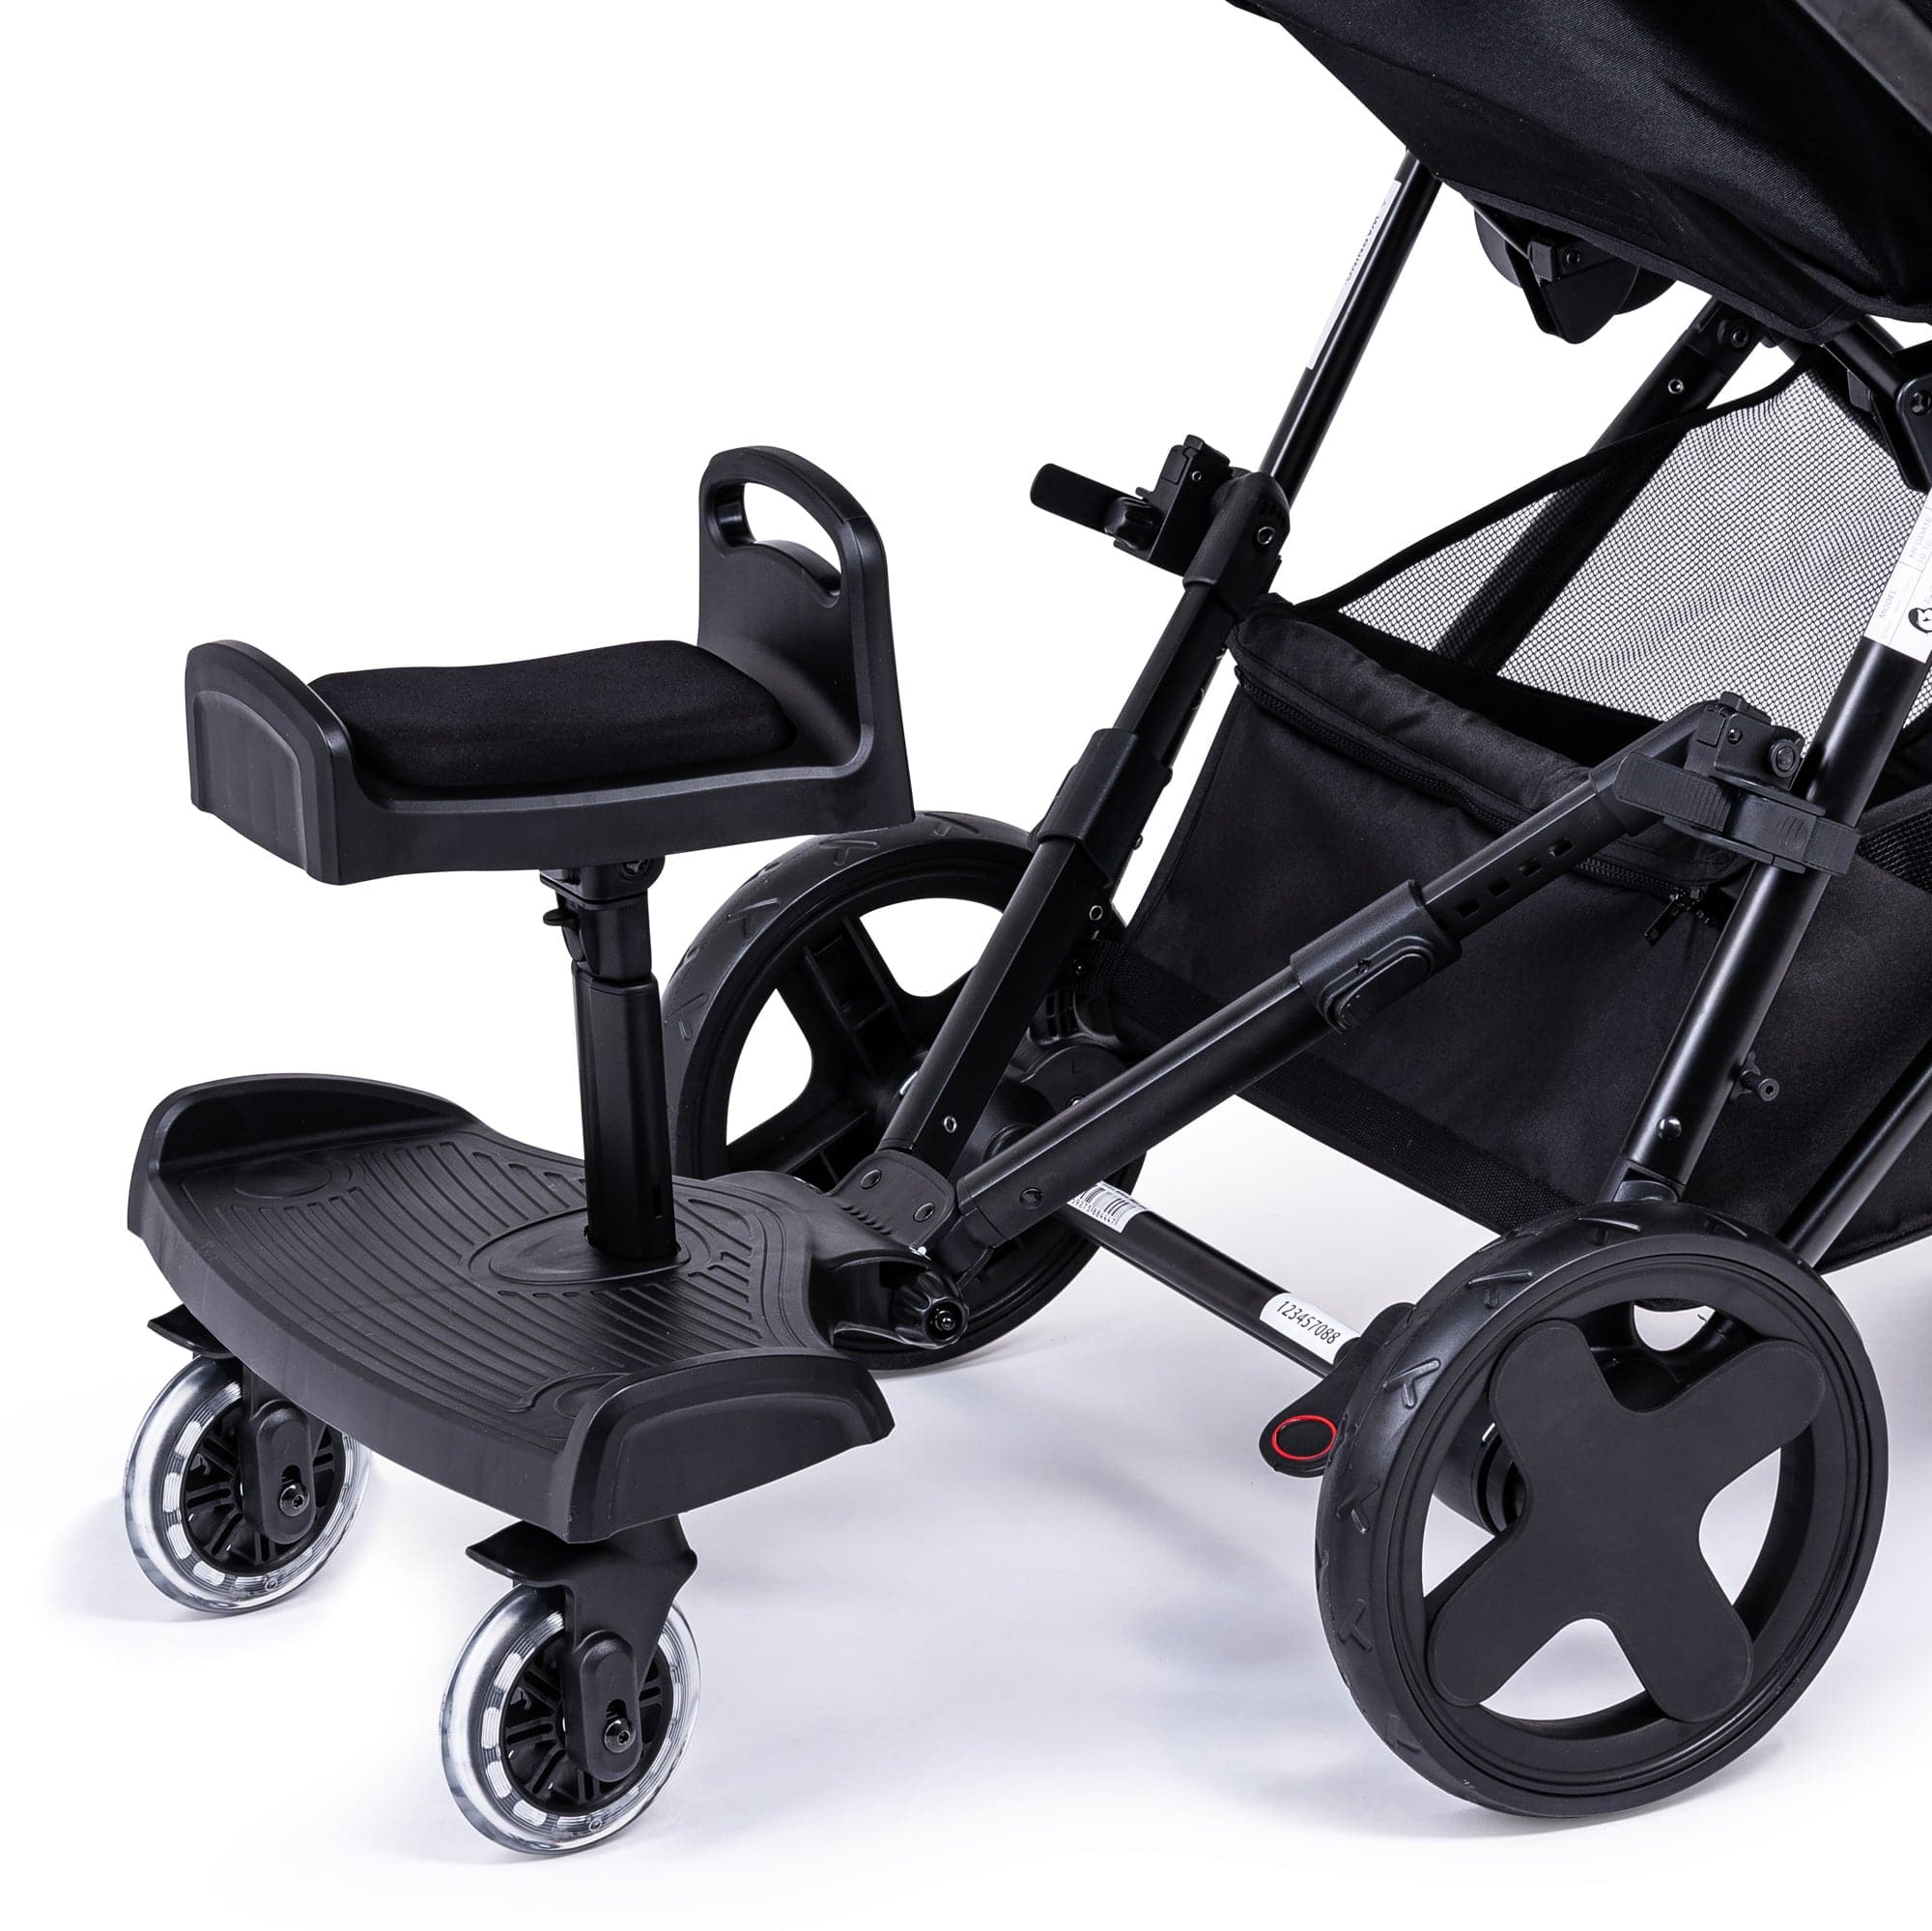 Ride On Board with Seat Compatible with BabiesRus - For Your Little One